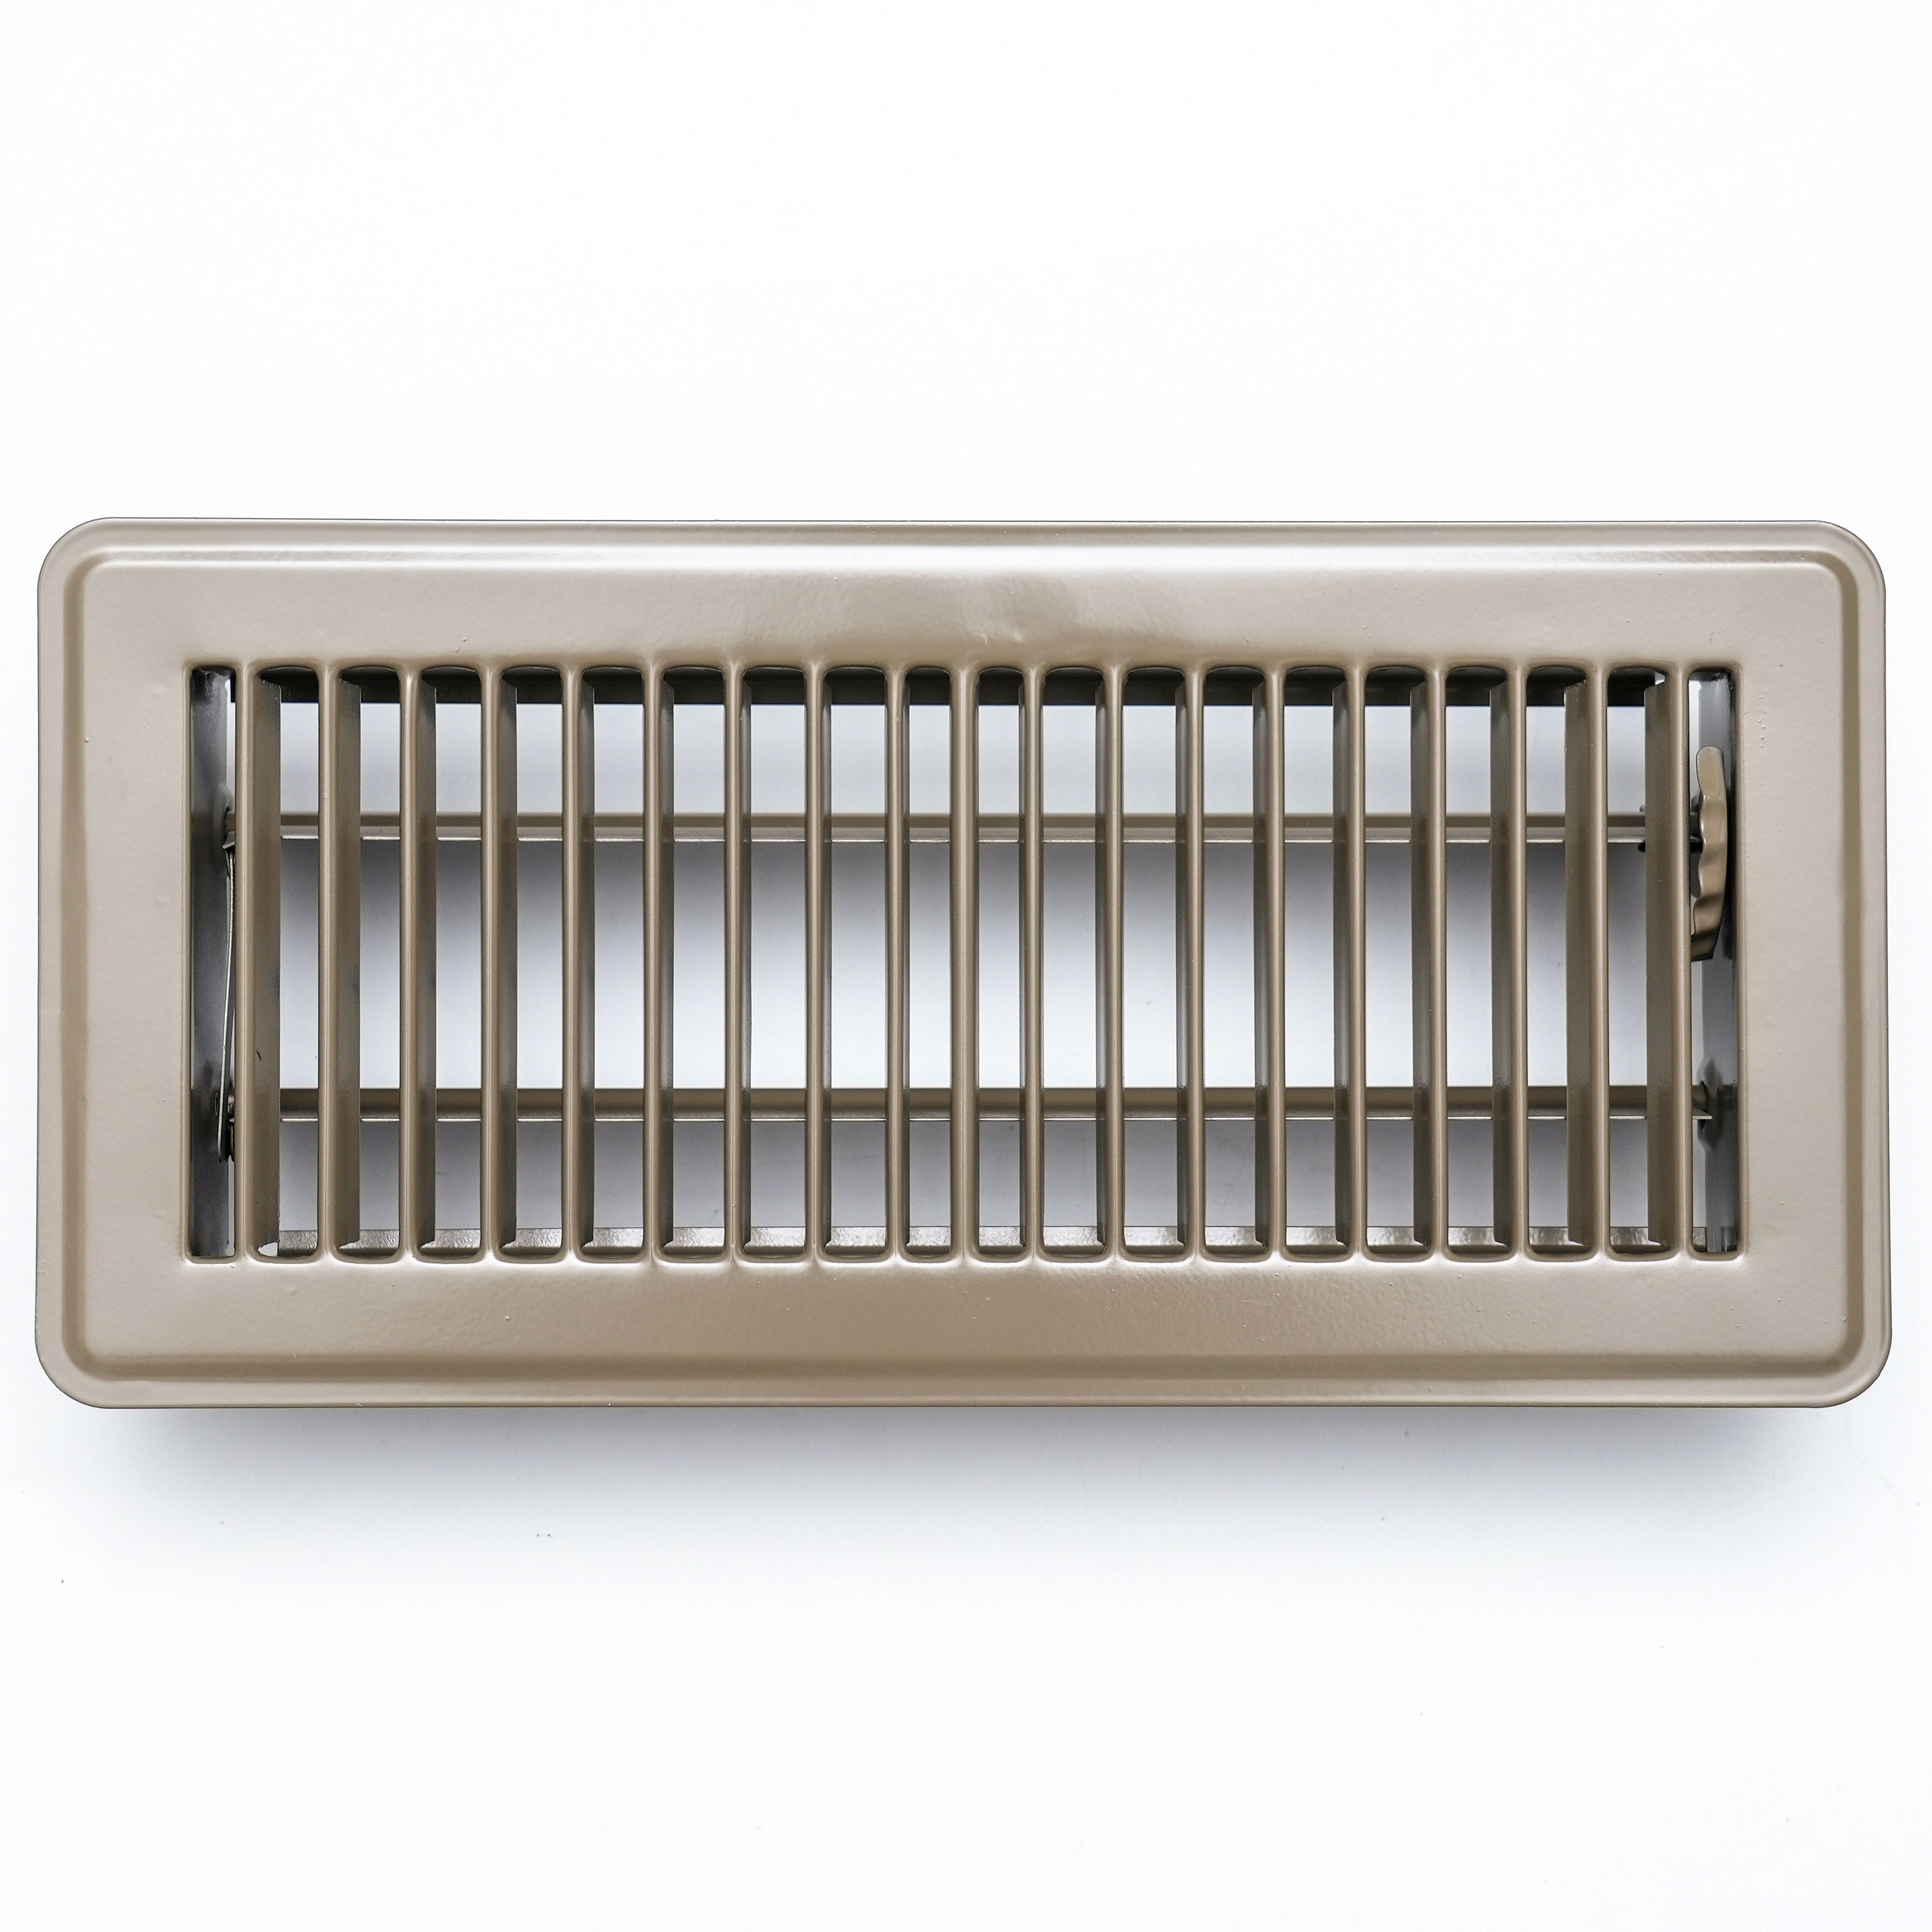 airgrilles 4" x 10" floor register with louvered design heavy duty walkable design with damper floor vent grille easy to adjust air supply lever brown hnd-flg-br-4x10  1